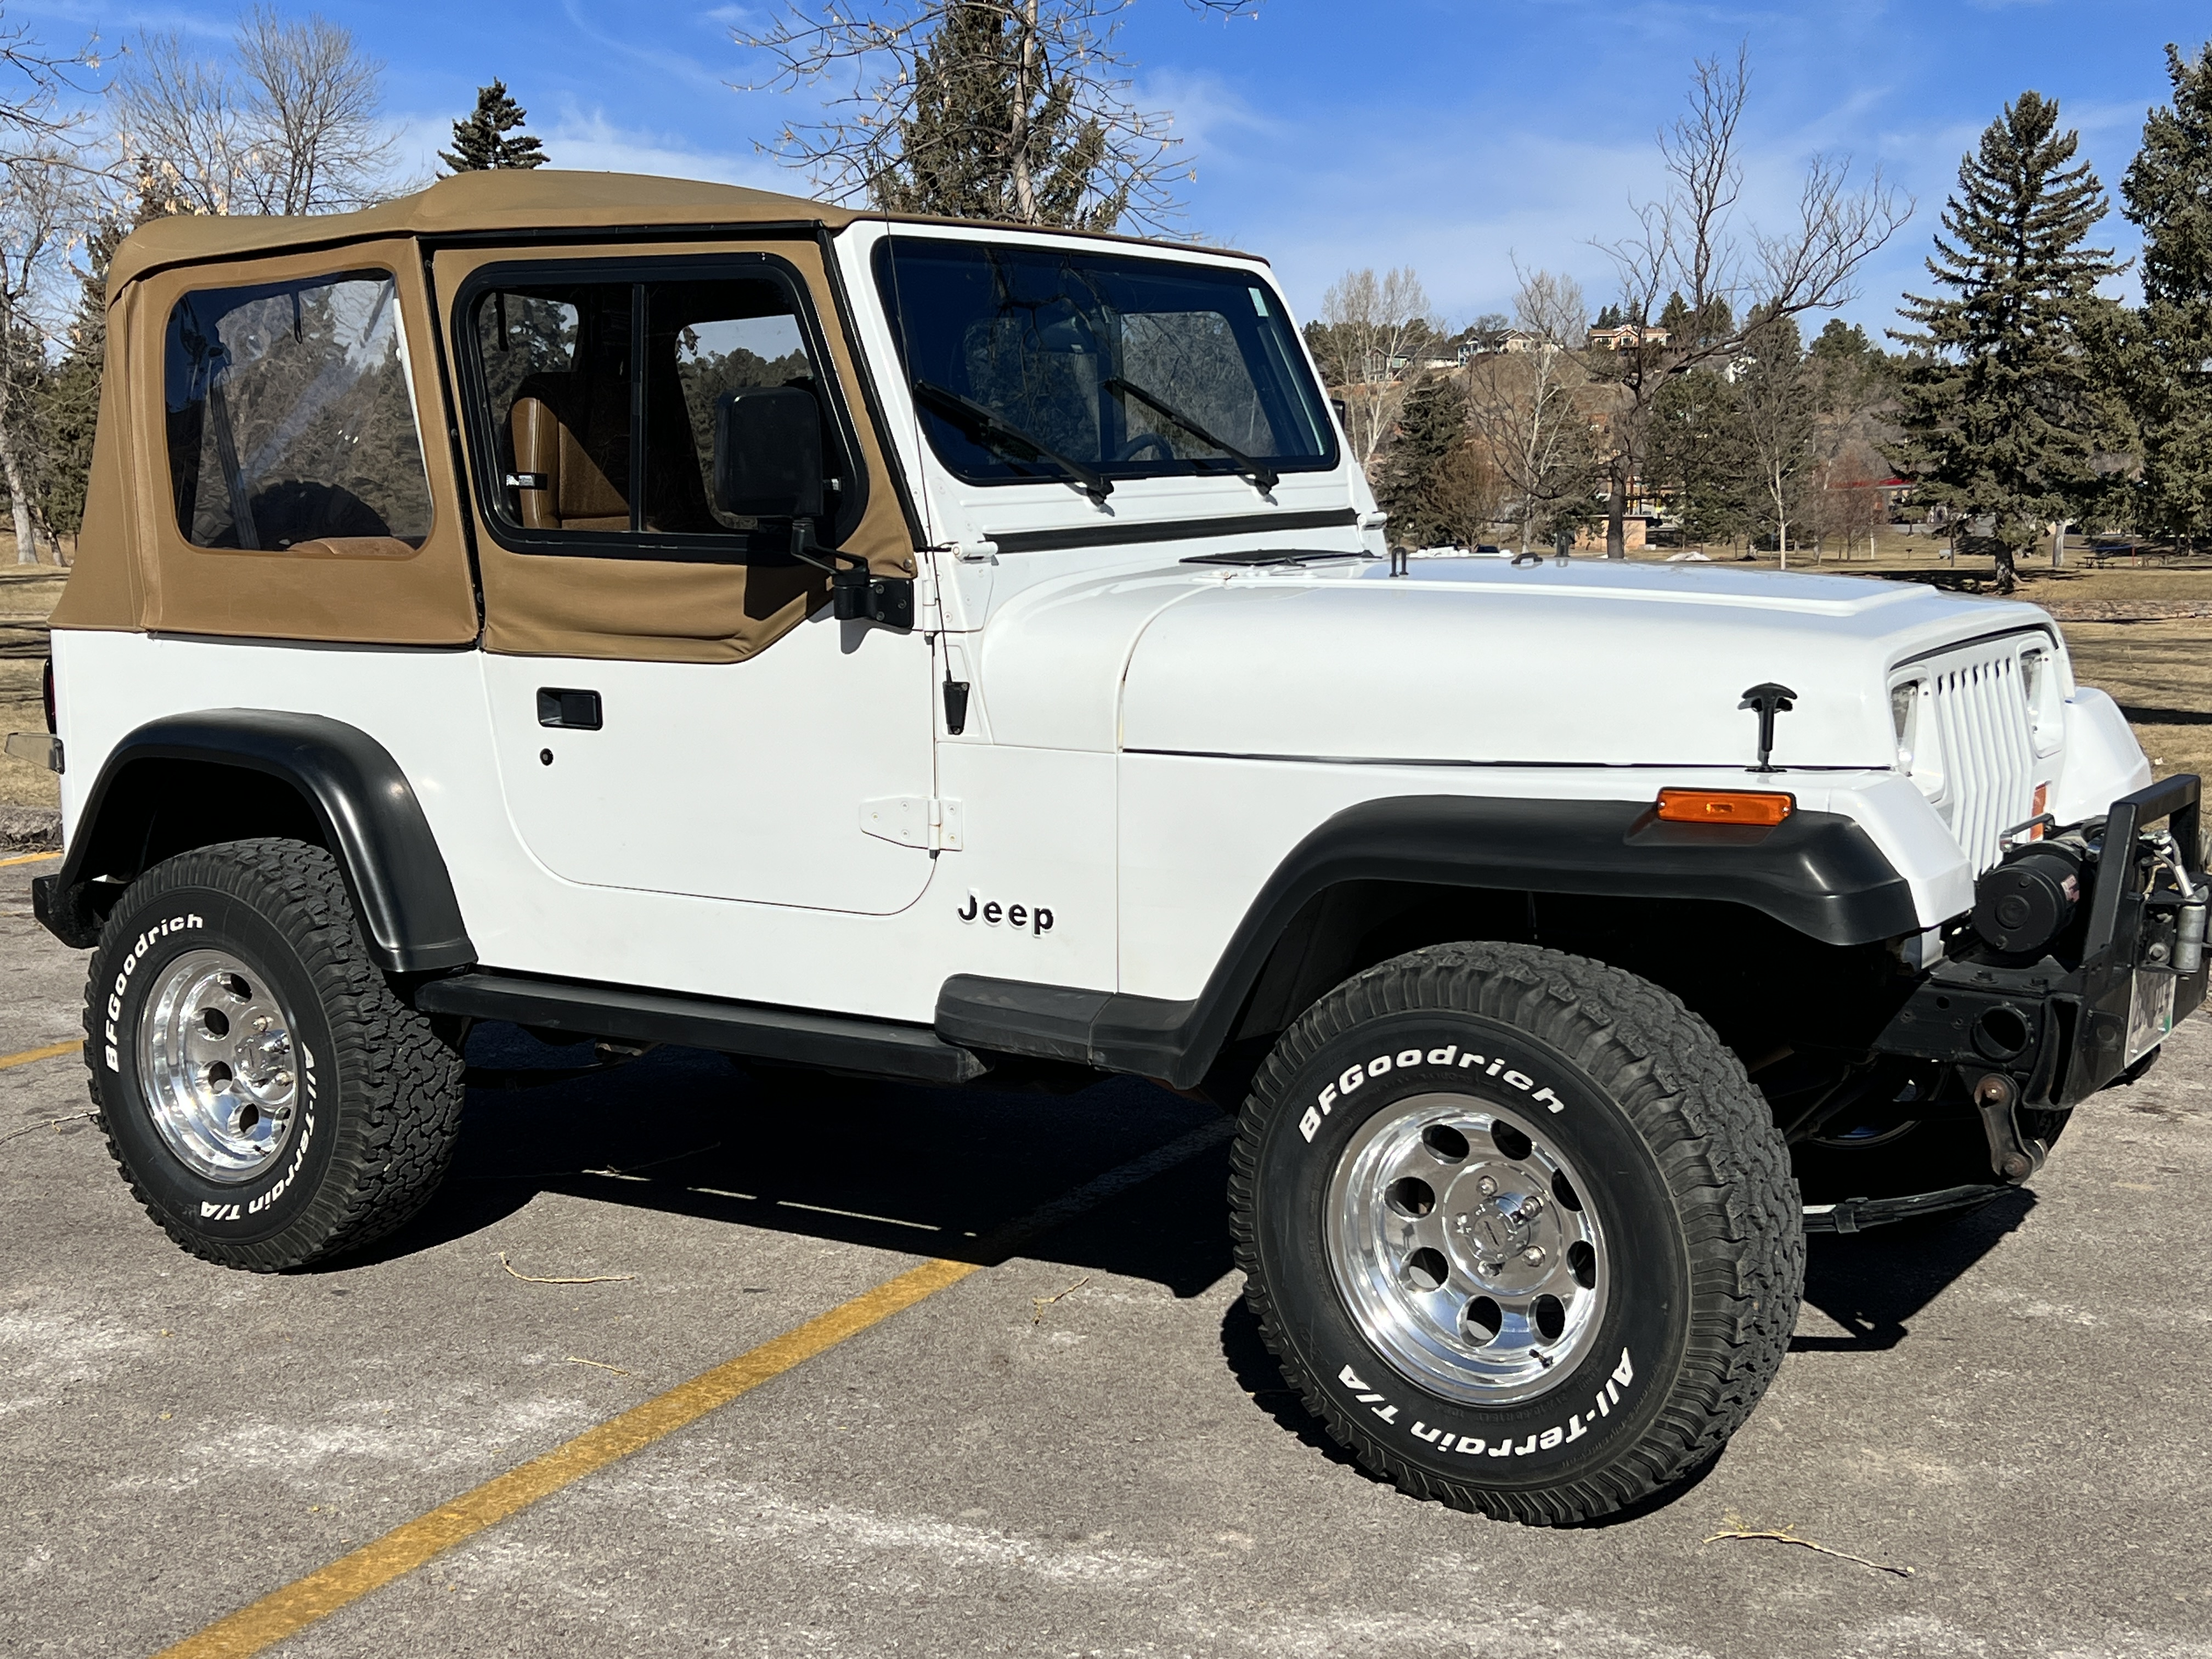 Used Jeep Wrangler for Sale in Rapid City, SD 